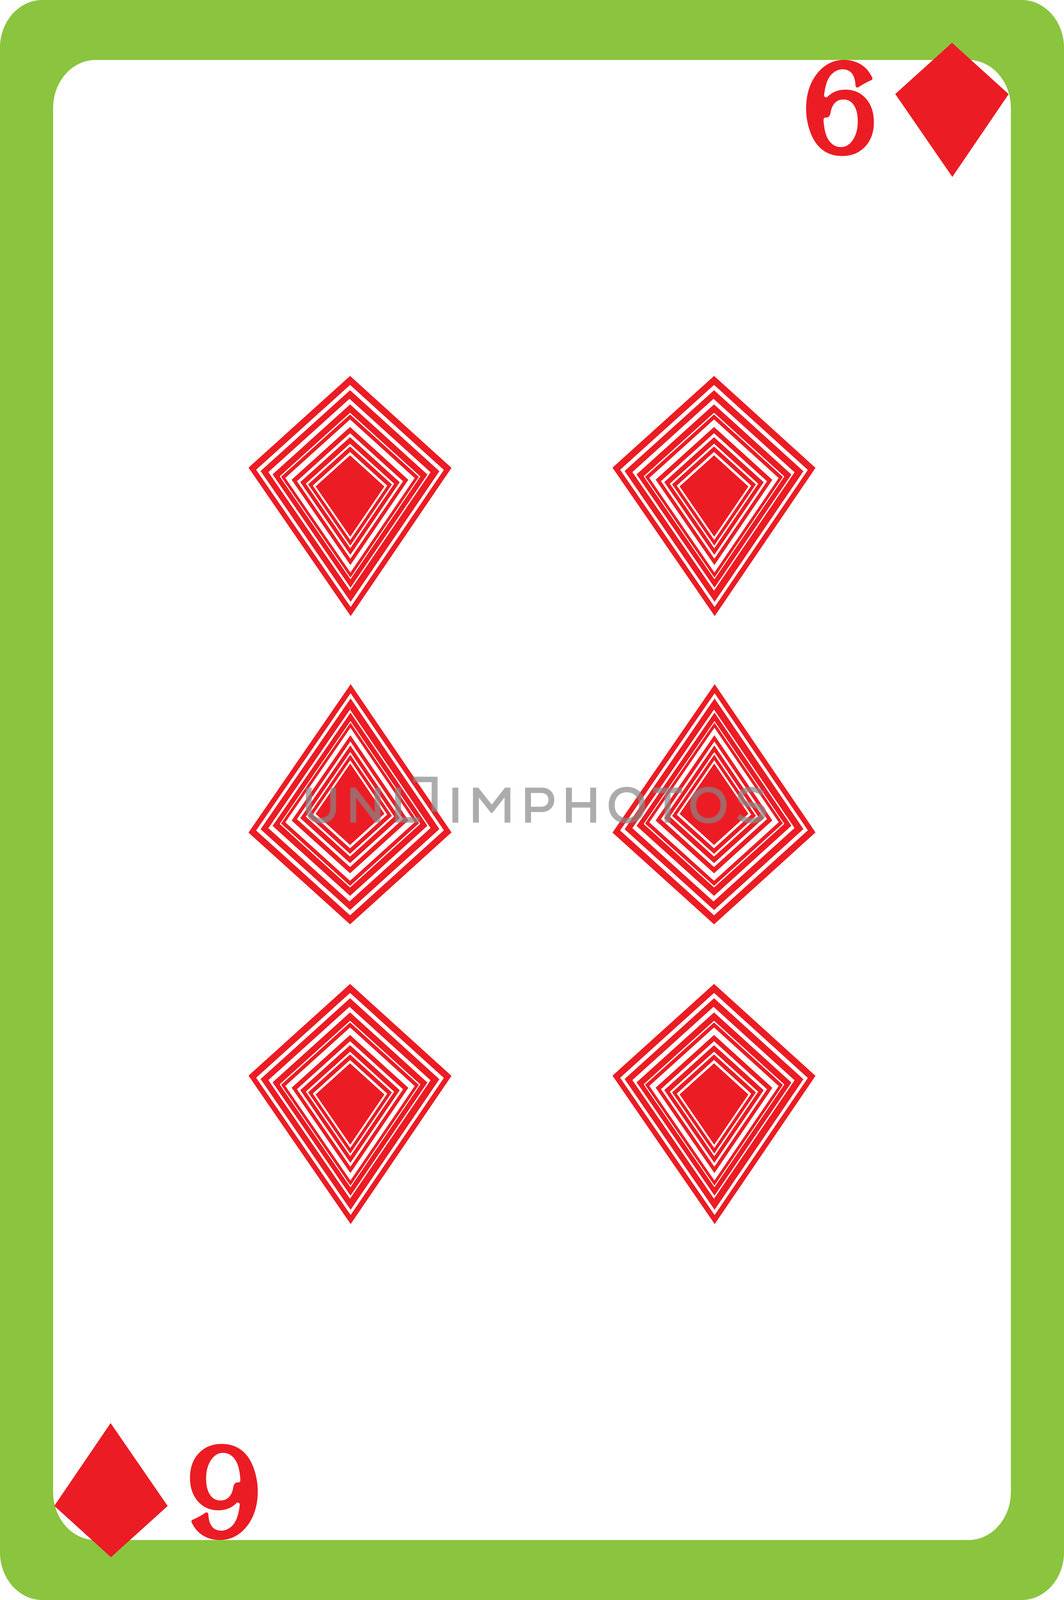 Scale hand drawn illustration of a playing card representing the six of diamonds, one element of a deck